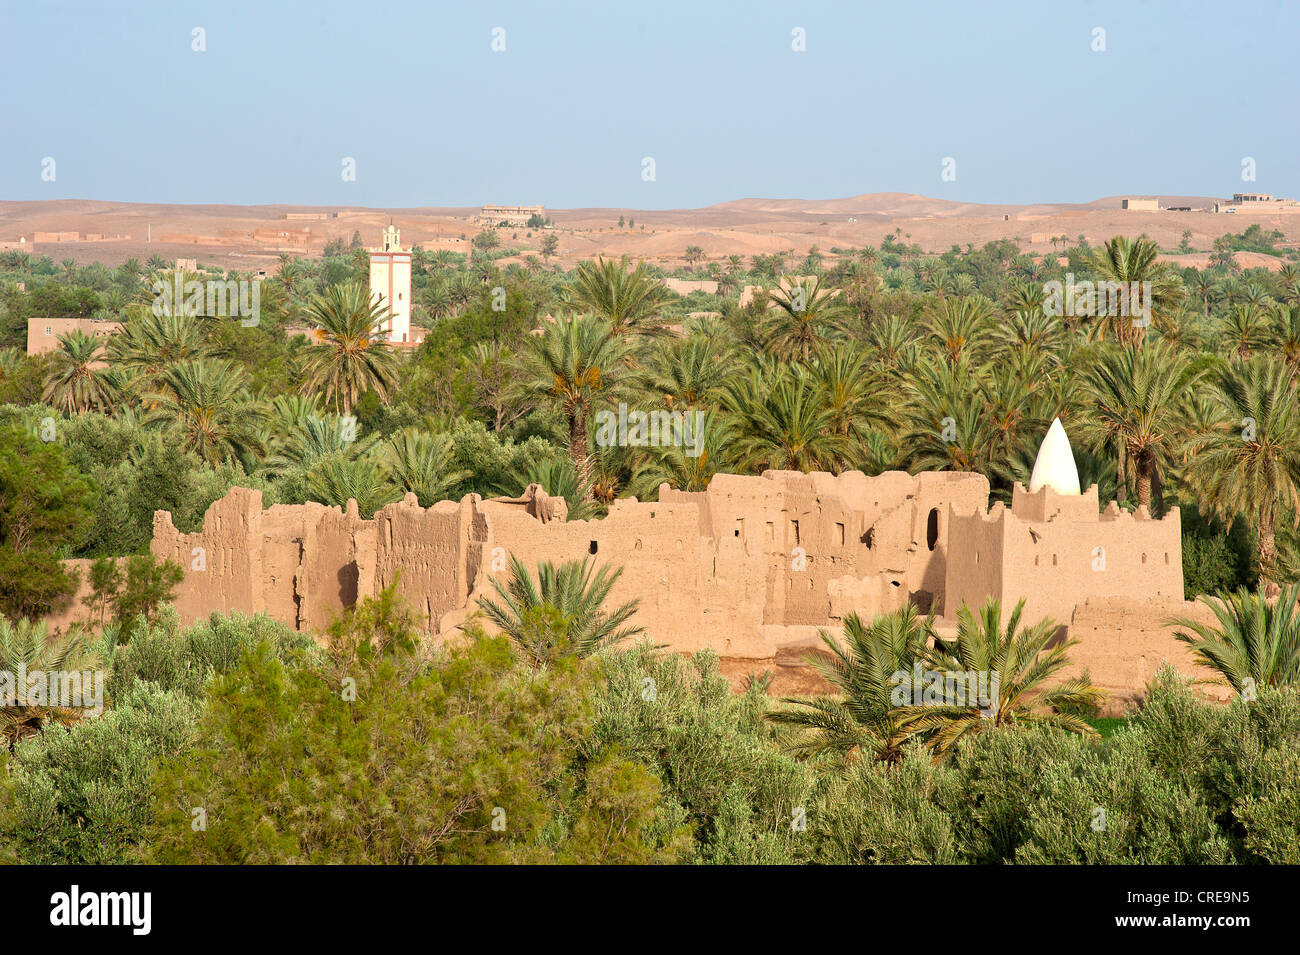 Marabout or tomb of an Islamic saint, and crumbling adobe houses in a palm grove near Skoura, behind the minaret of a mosque Stock Photo